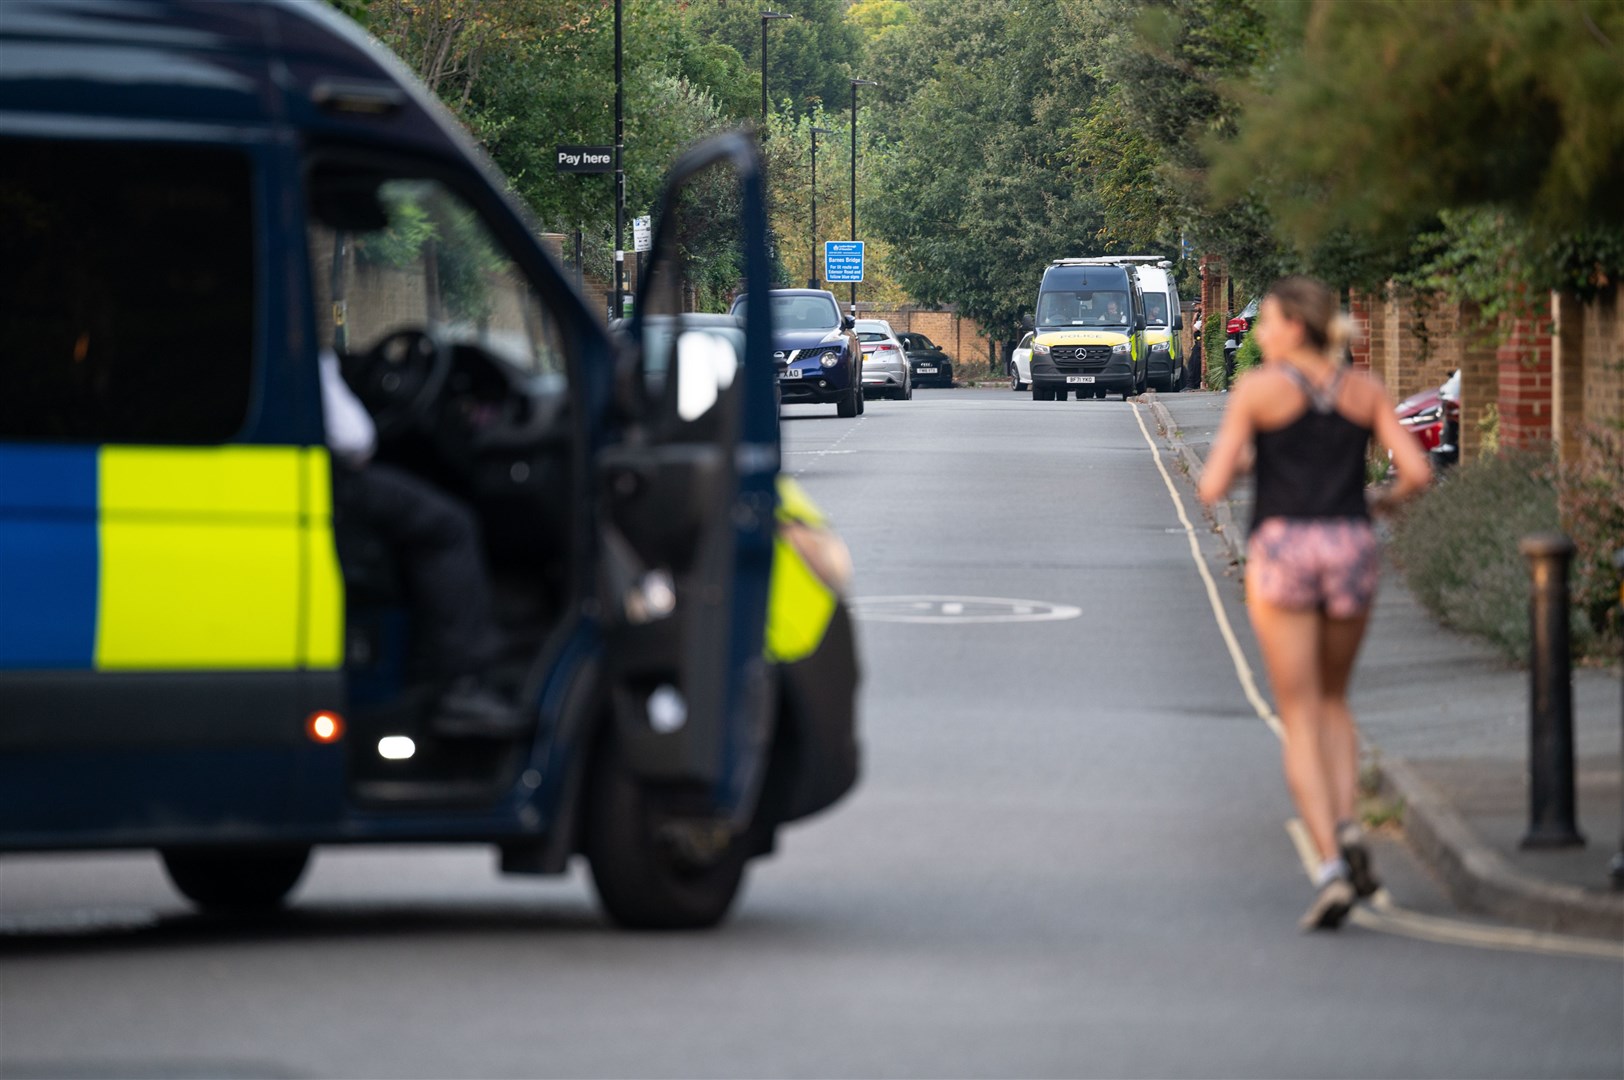 Police in the Chiswick area in west London (Jamie Lashmar/PA)